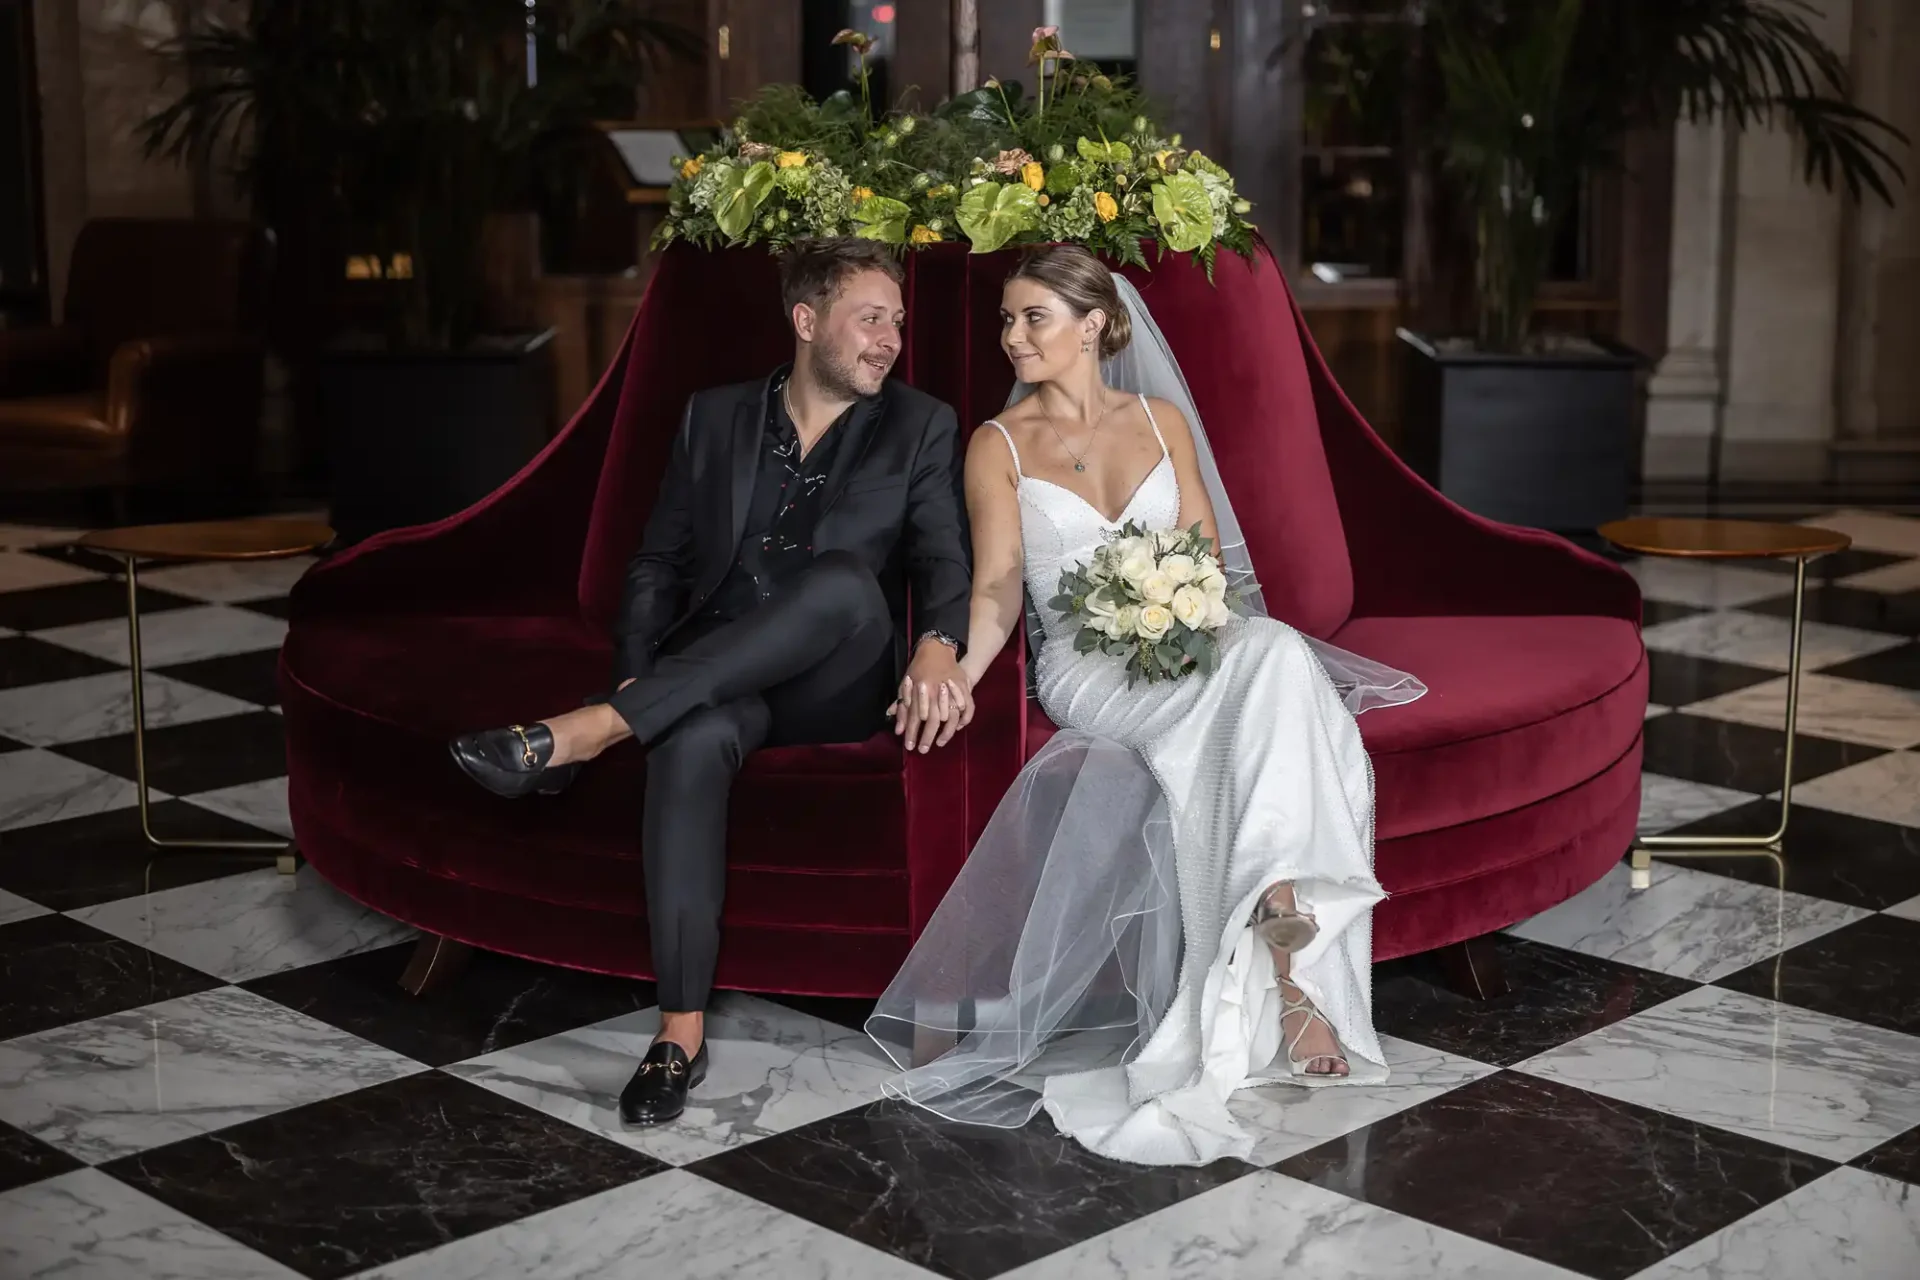 A newlywed couple, dressed in elegant wedding attire, sitting closely on a red velvet sofa, surrounded by flowers, in a luxurious lobby with black and white tiled flooring.